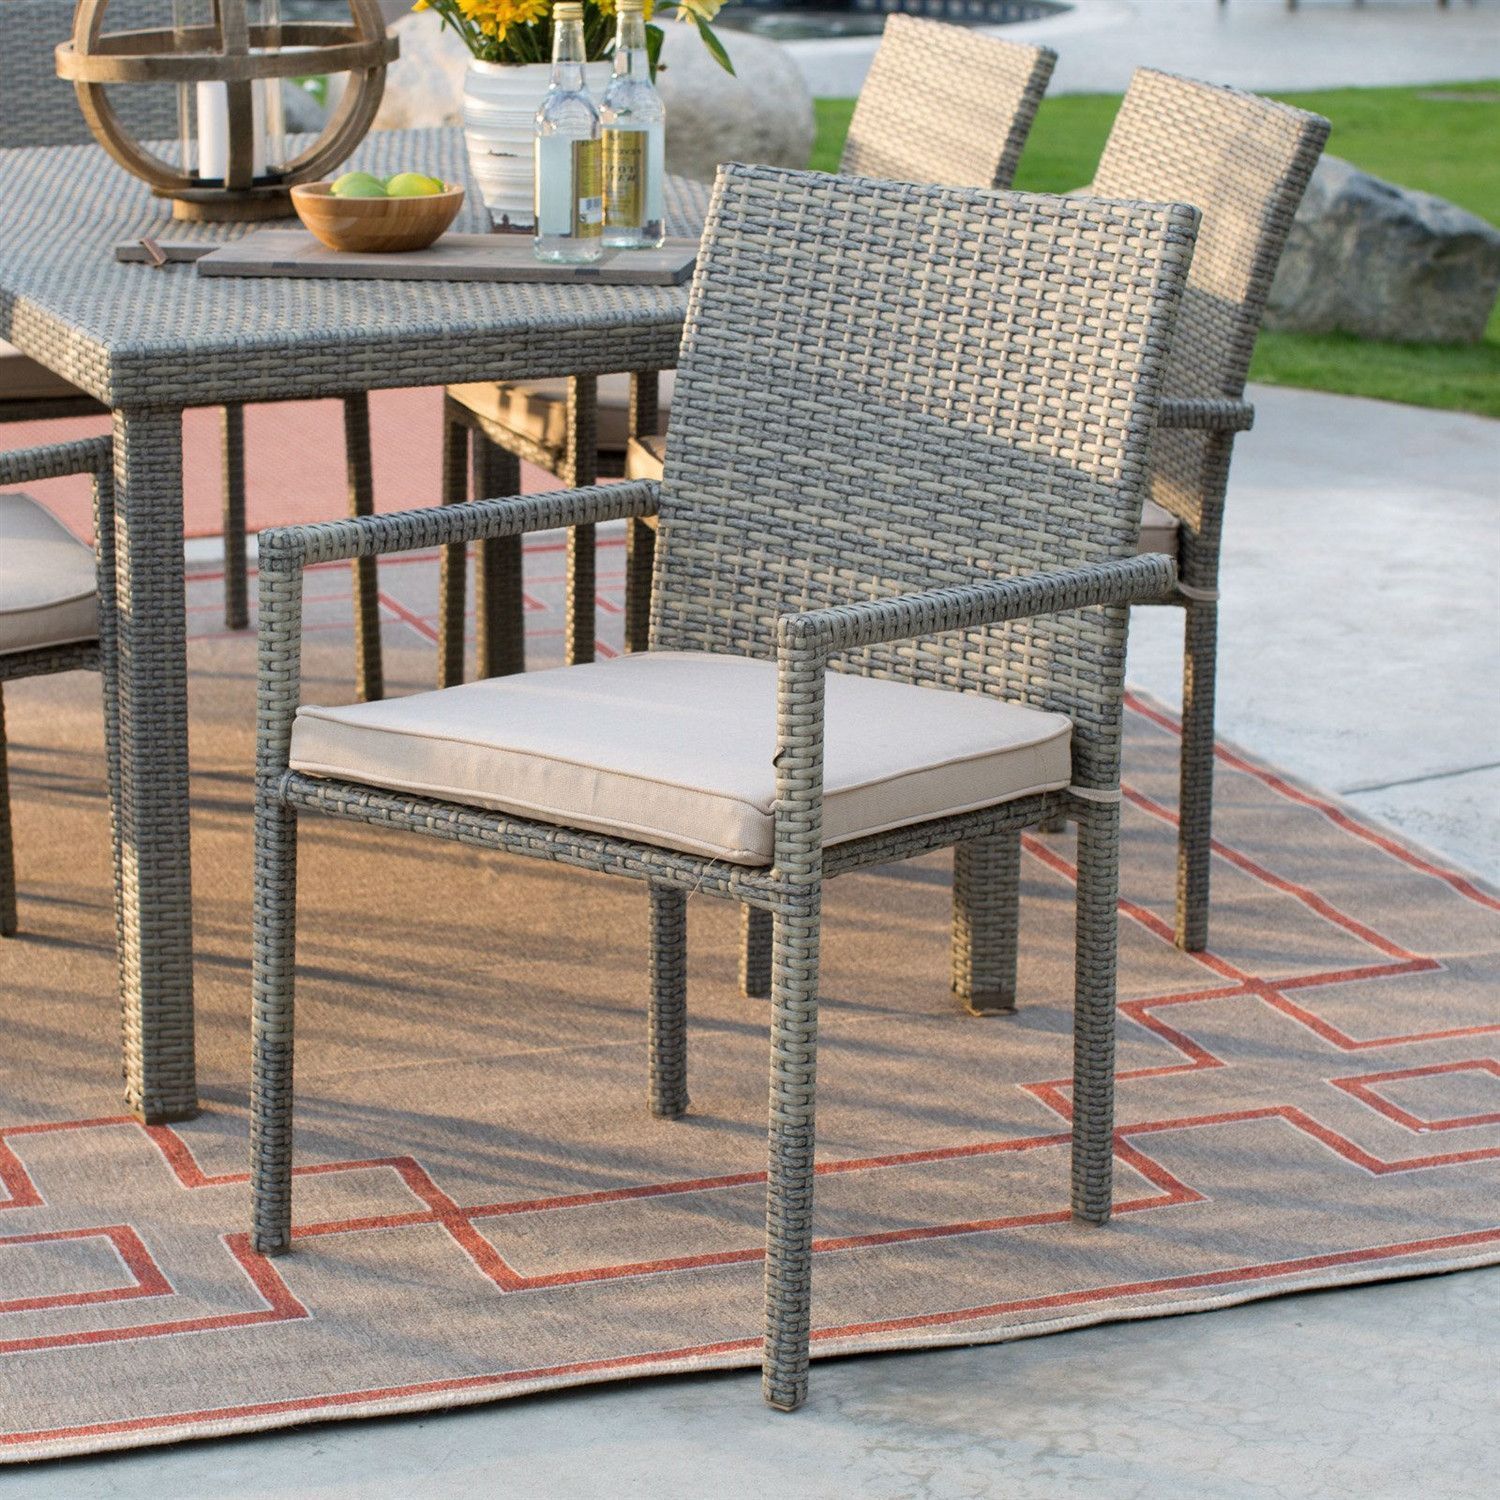 Outdoor Weather Resistant Resin Wicker Patio Dining Chair Arm Chair In Pertaining To Natural All Weather Outdoor Seating Patio Sets (View 6 of 15)